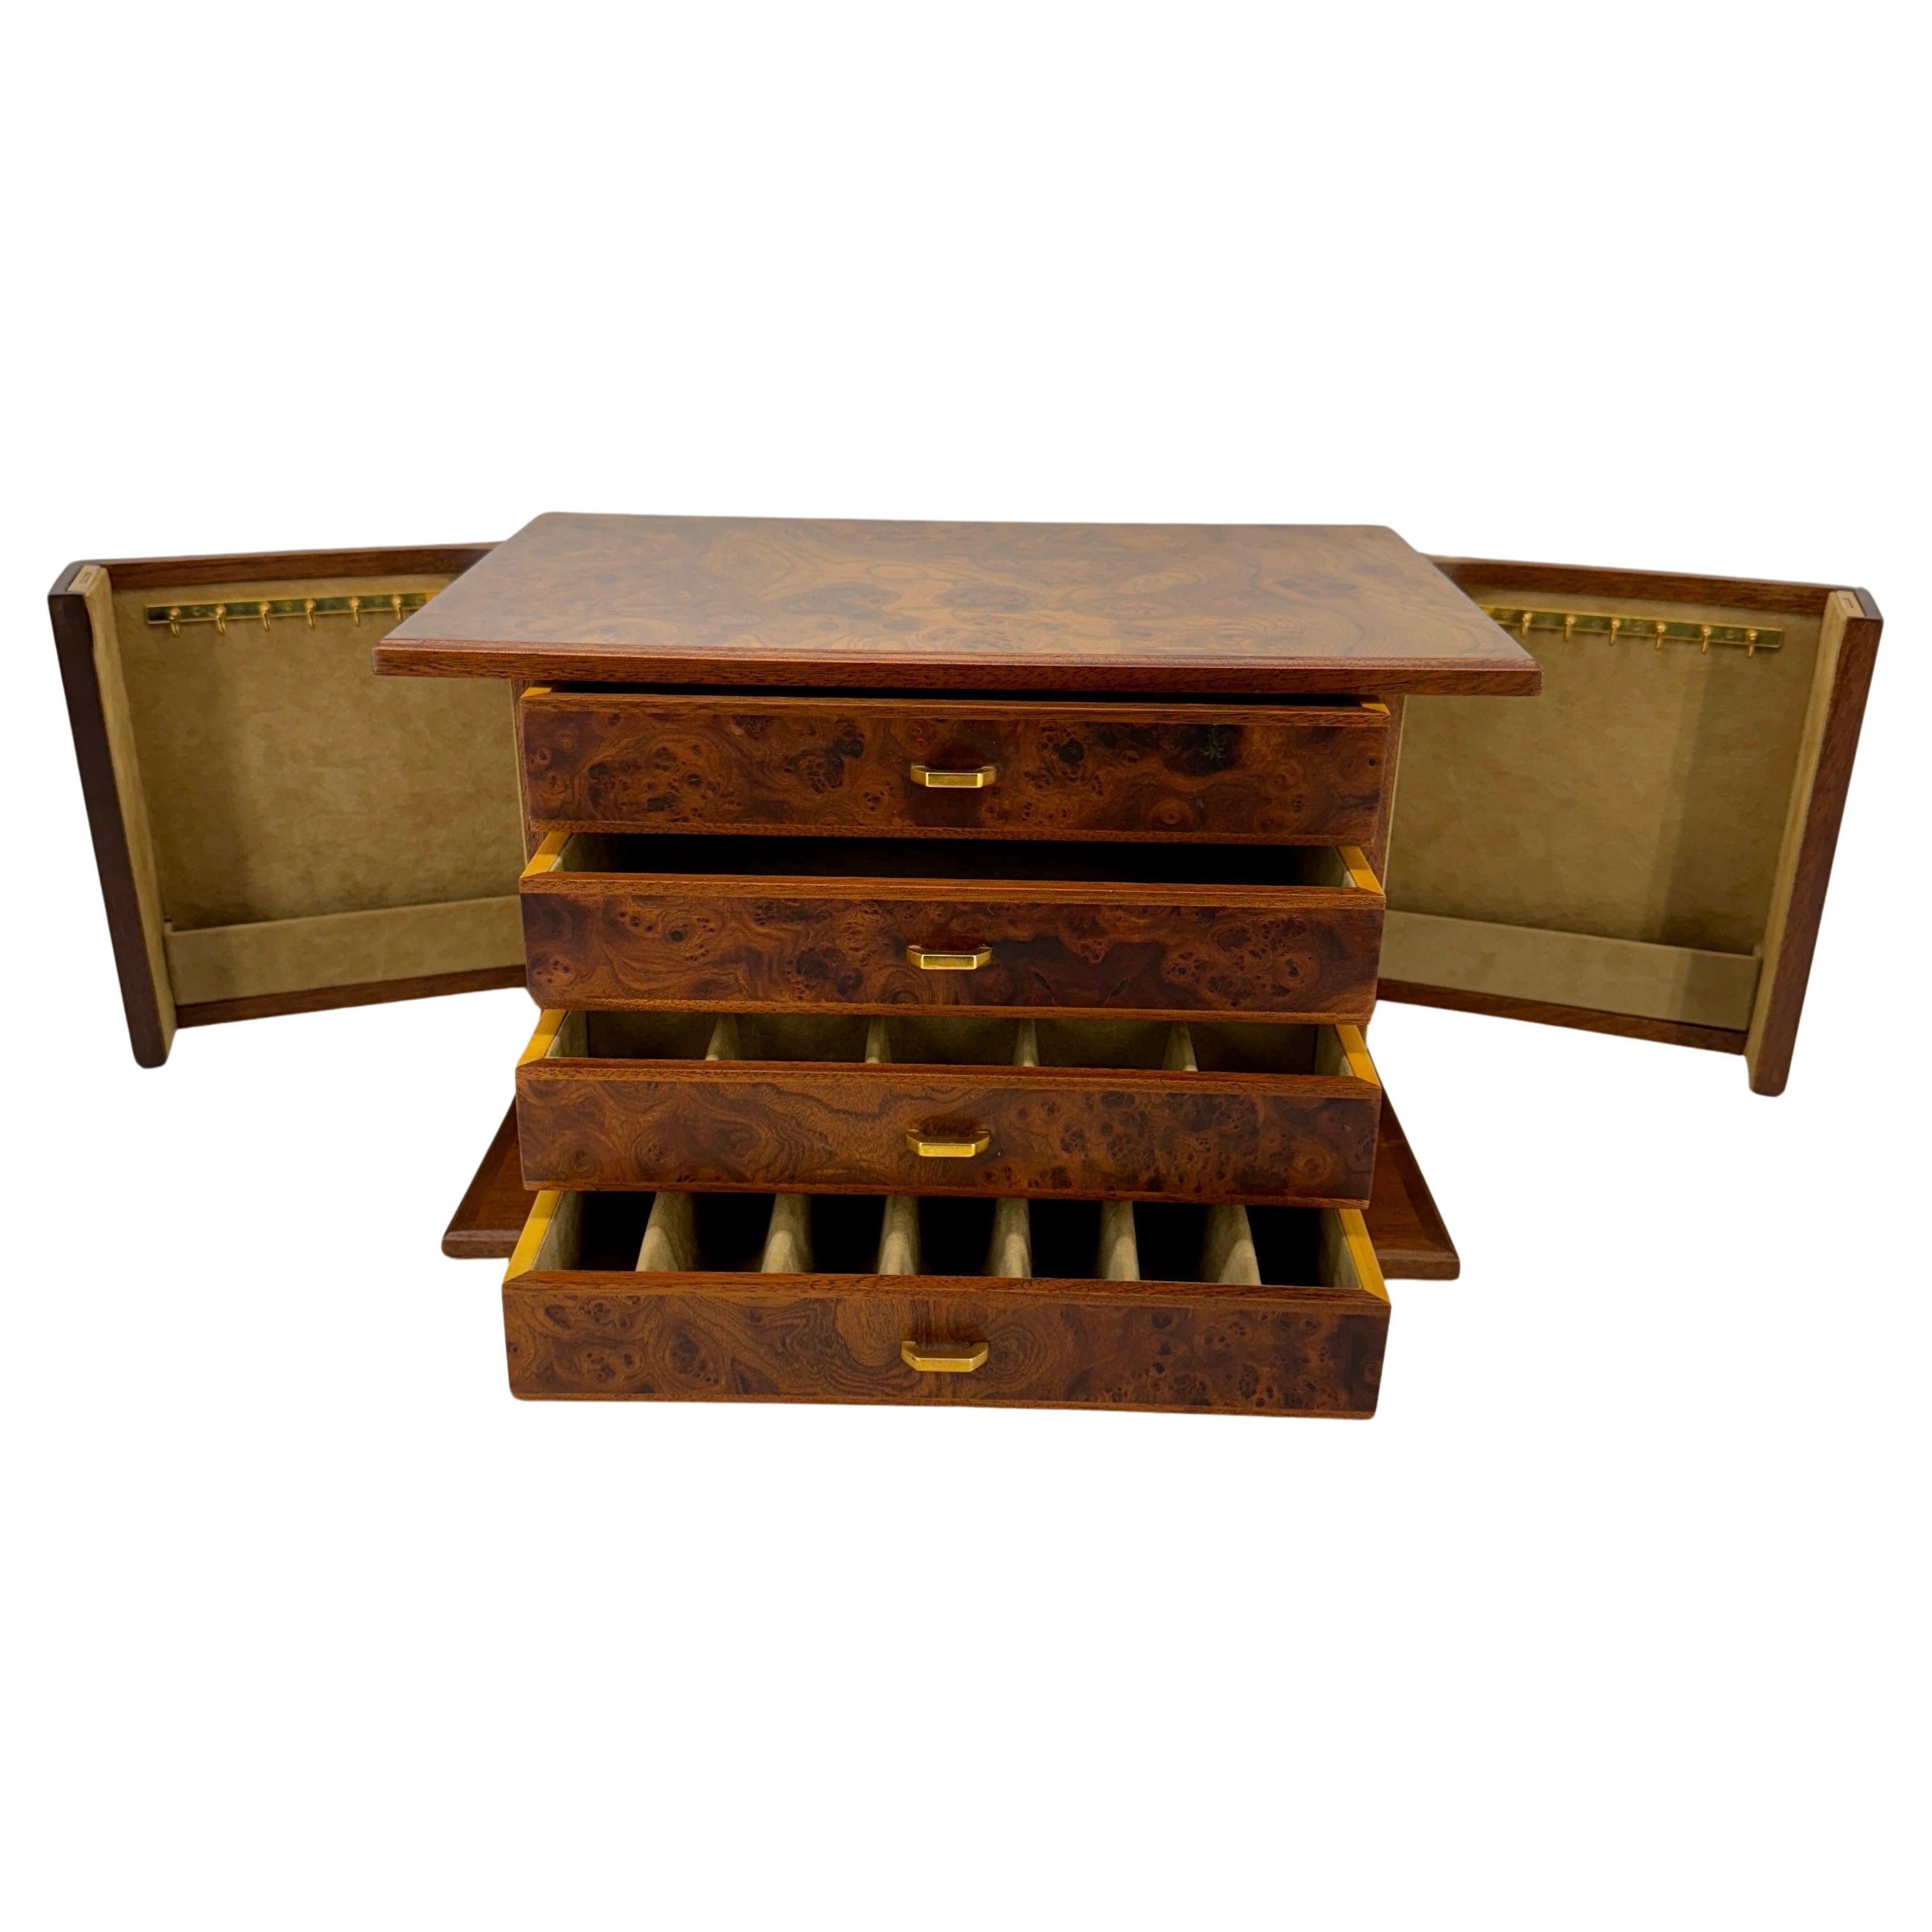 Italian Mid Century Modern Burl Wood Jewelry Box  with Brass Hardware, Marked MADE IN ITALY.
The drawers are for rings and are split into different smalleer size compartments.
This rather large box has two cabinet doors that swings open to reveal